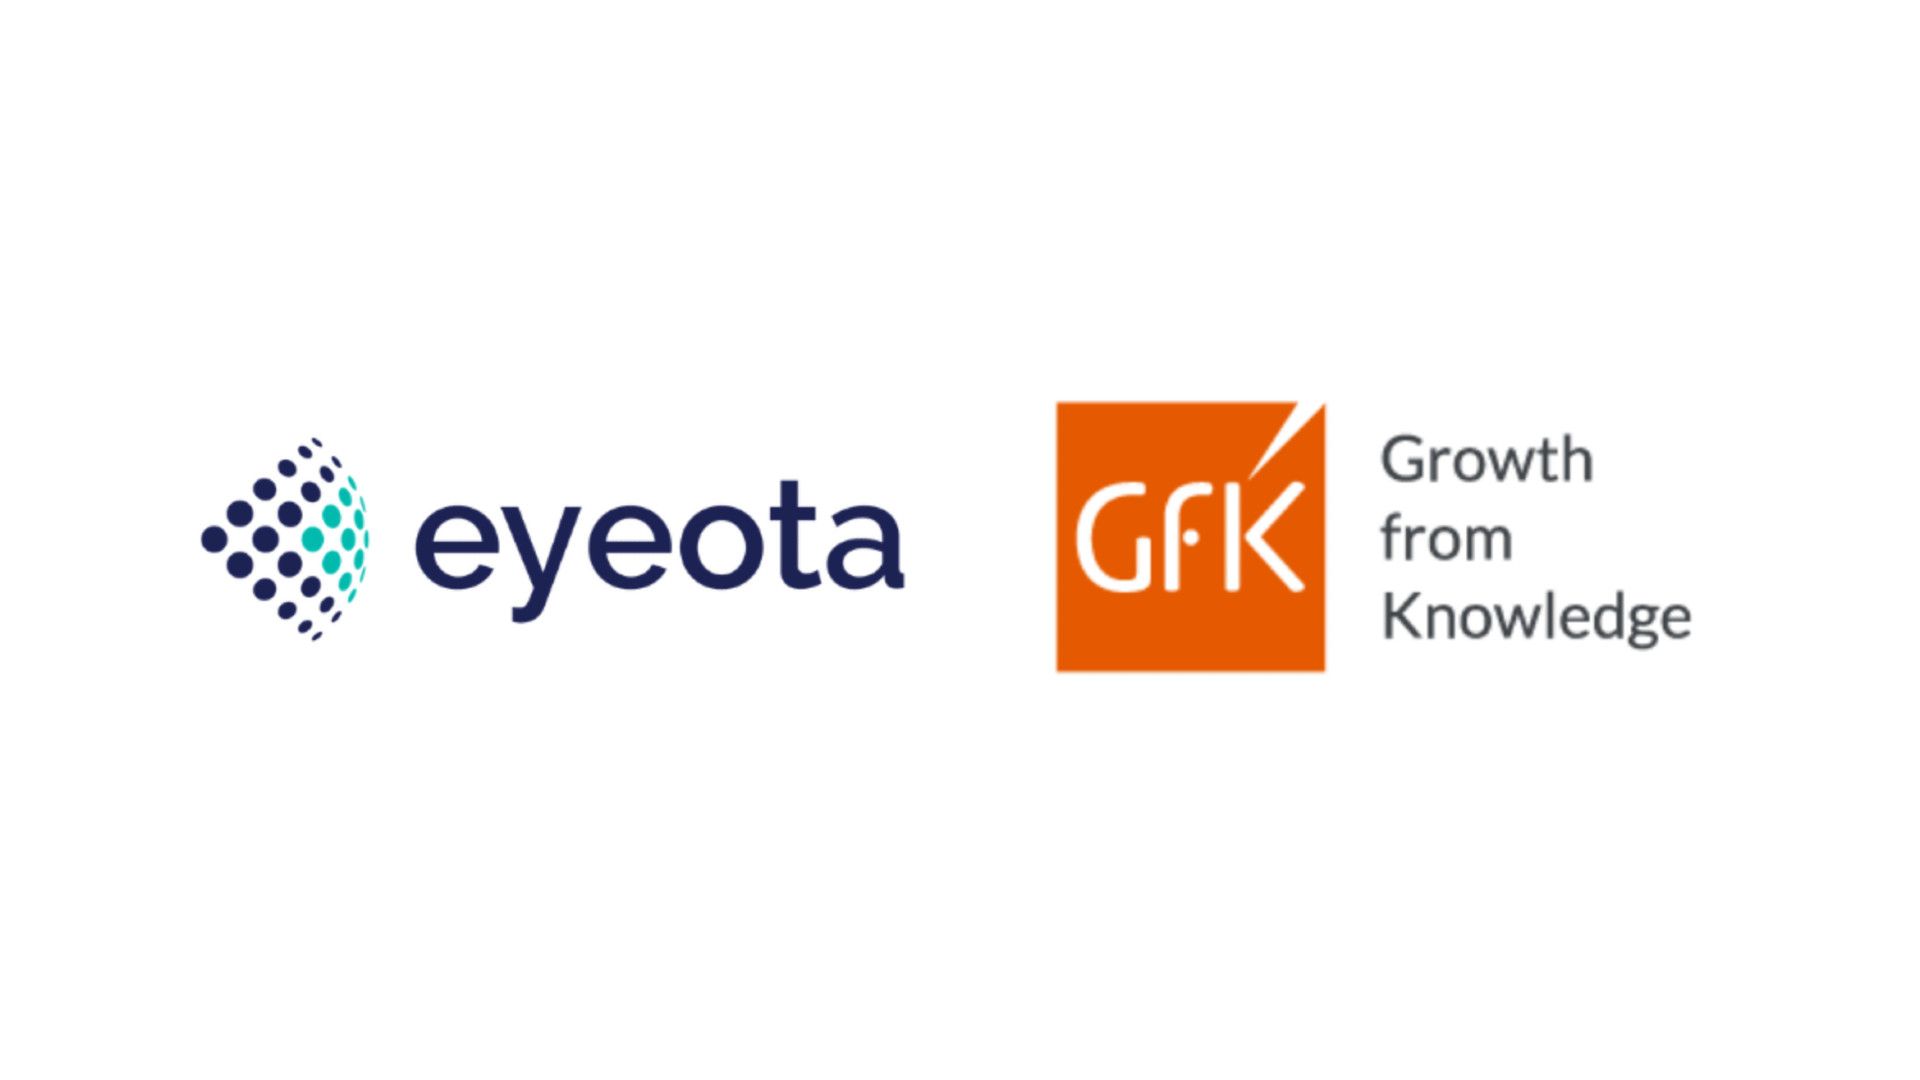 GfK onboards data from Switzerland and New Zealand in Eyeota